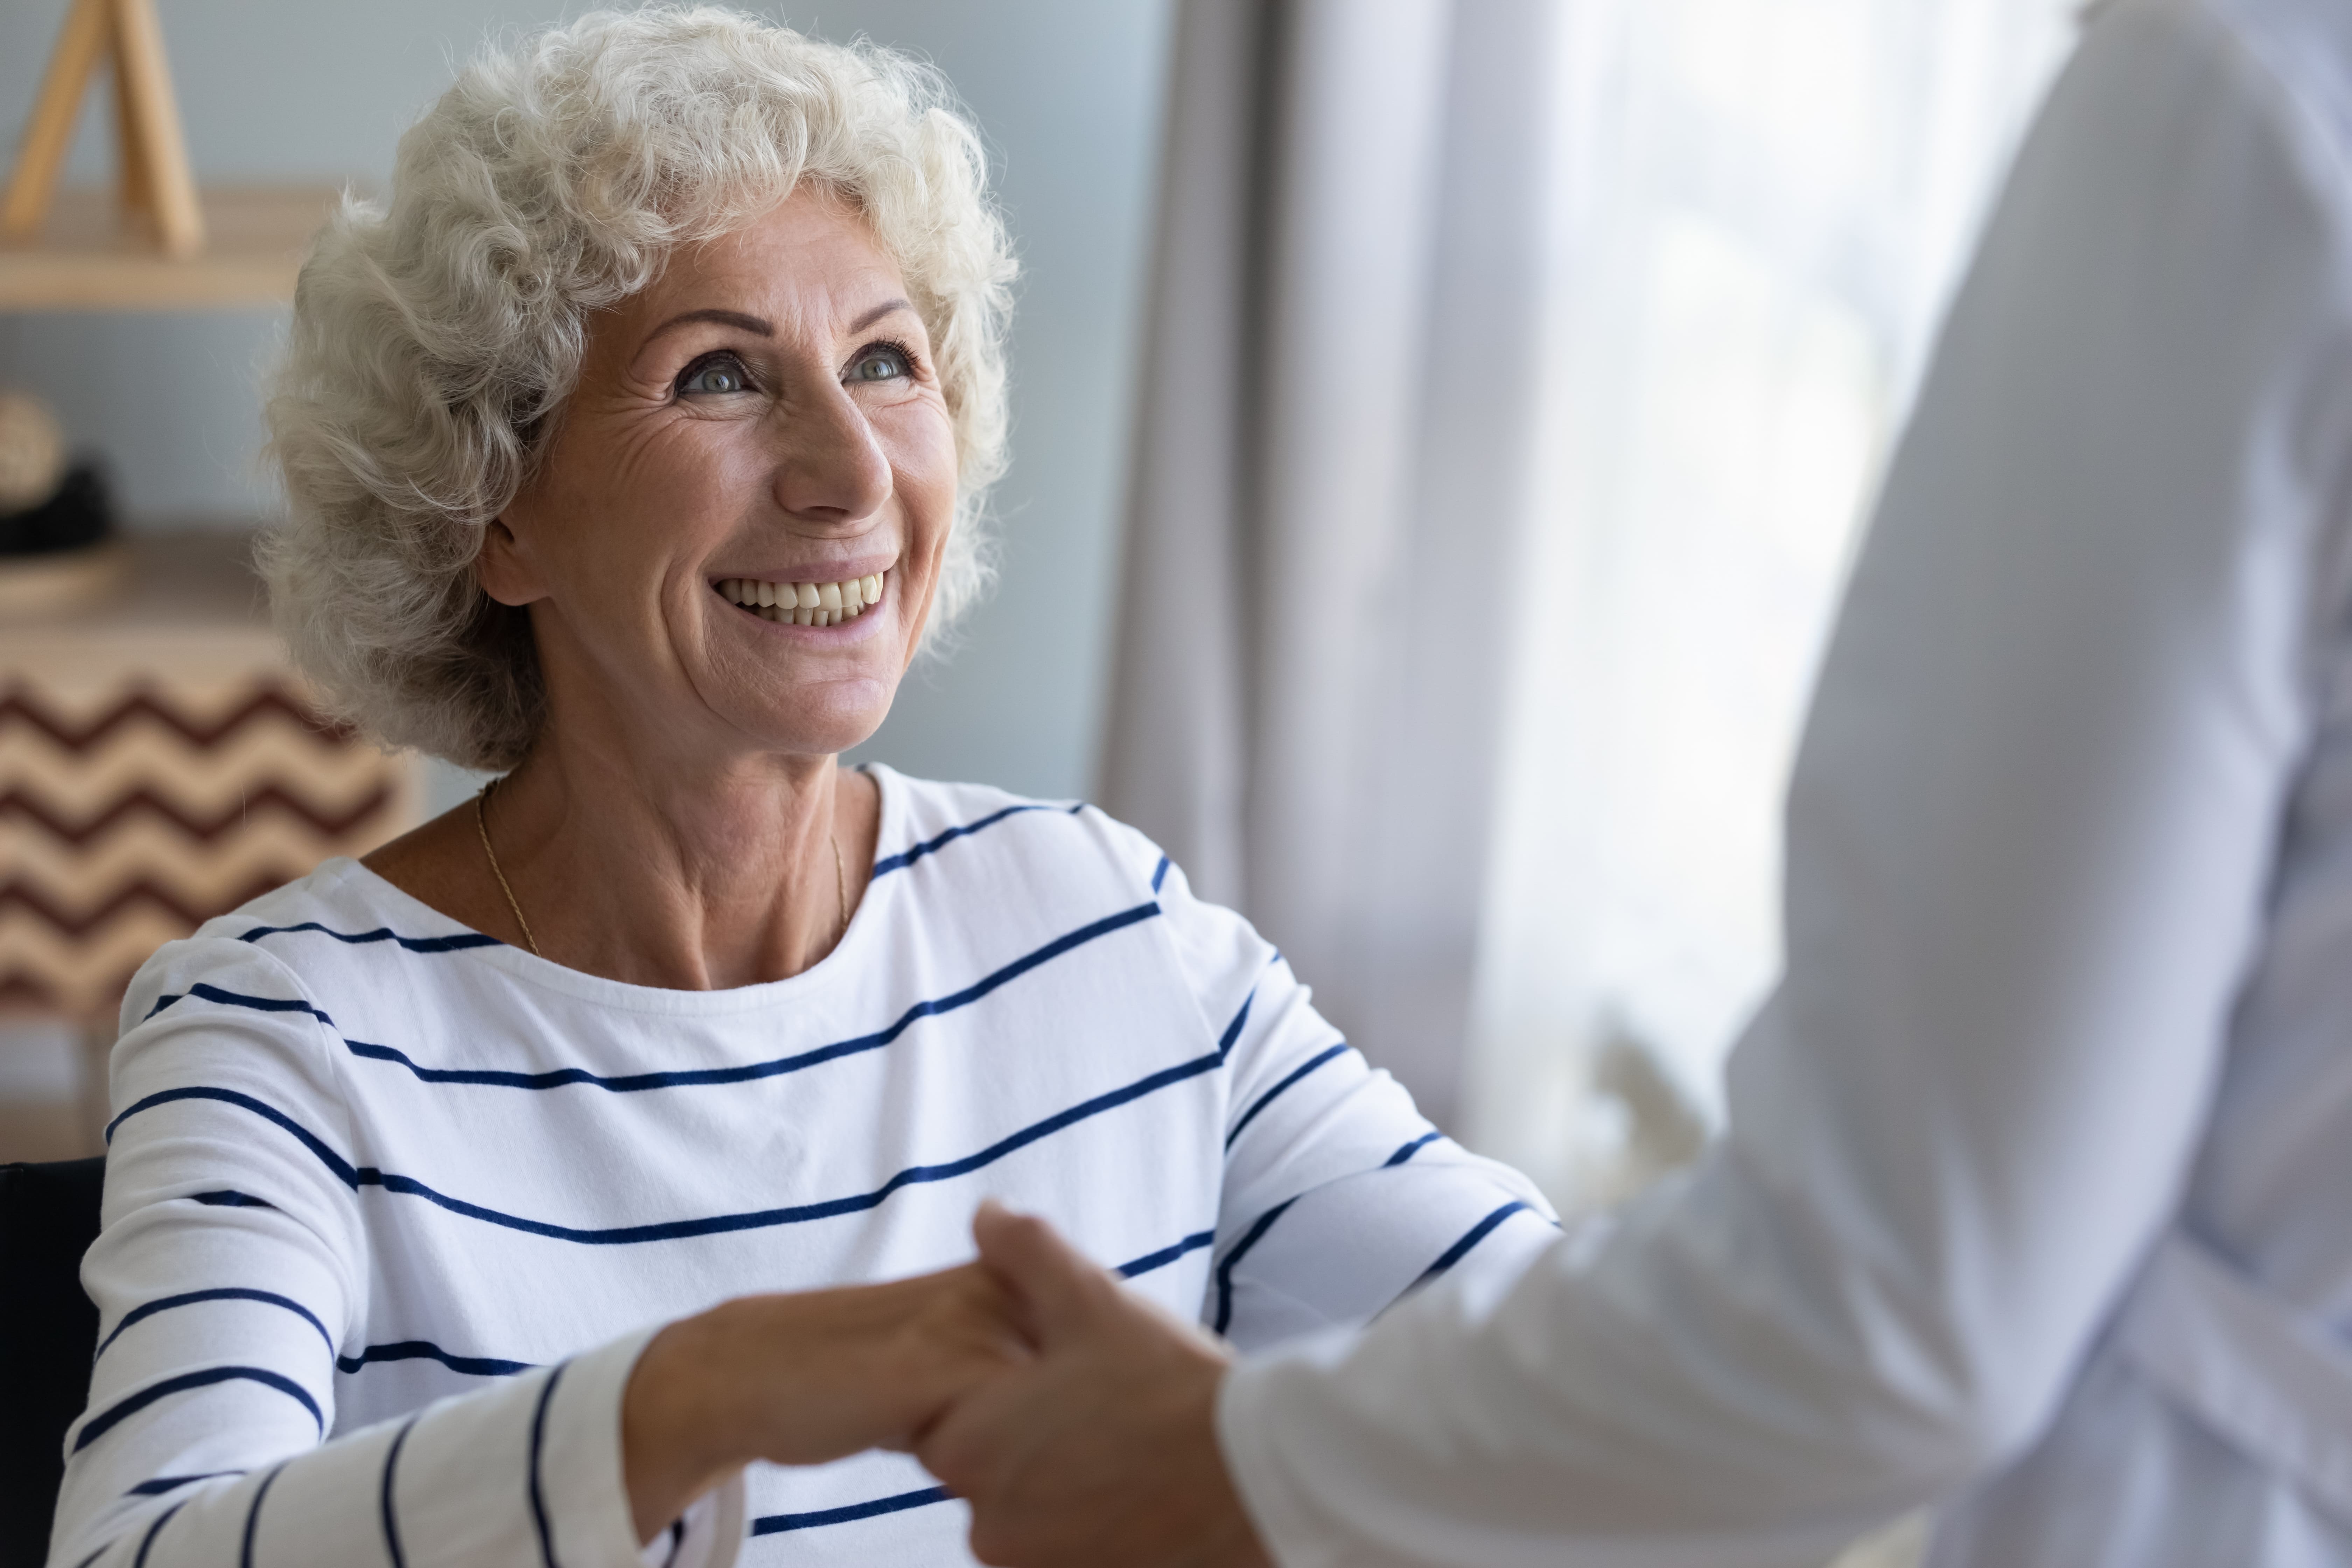 Smiling senior woman holding hands of someone out of frame